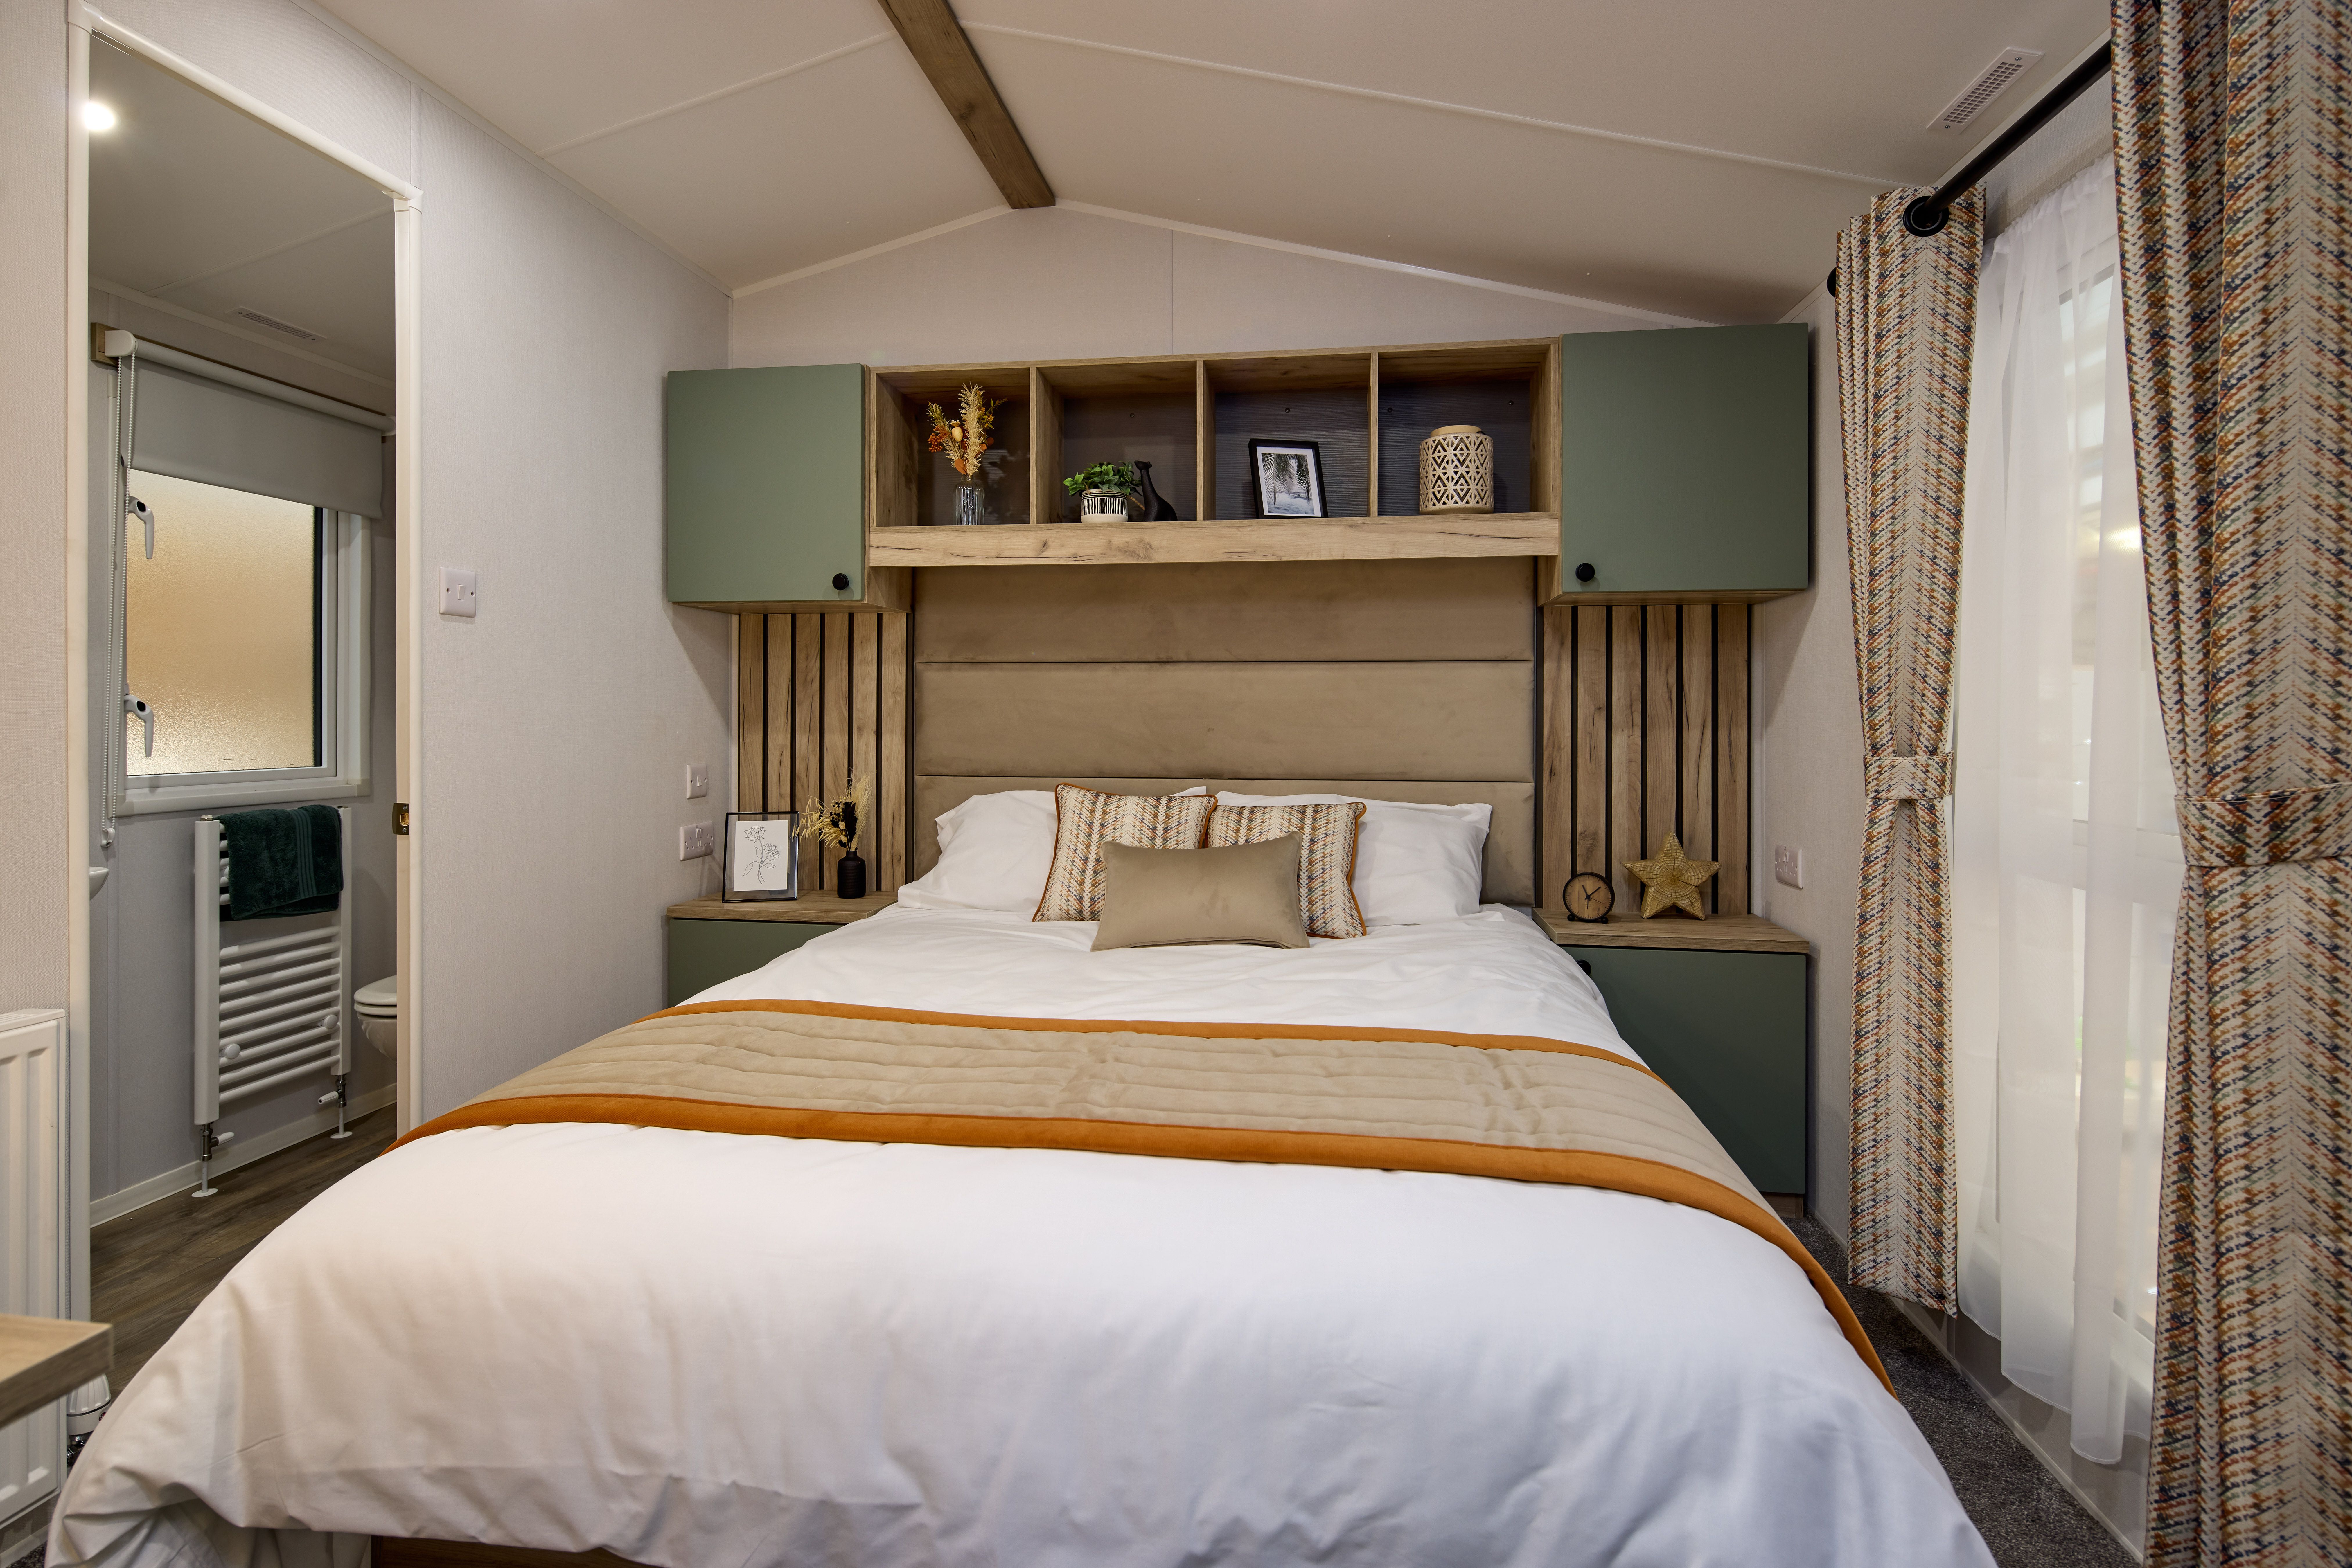 The master bedroom in the Willerby Buxton holiday home. The en-suite bathroom can be glimpsed through a side door. The bed is large and built-in cupboards provide plenty of storage. Full-height windows let in plenty of light. 